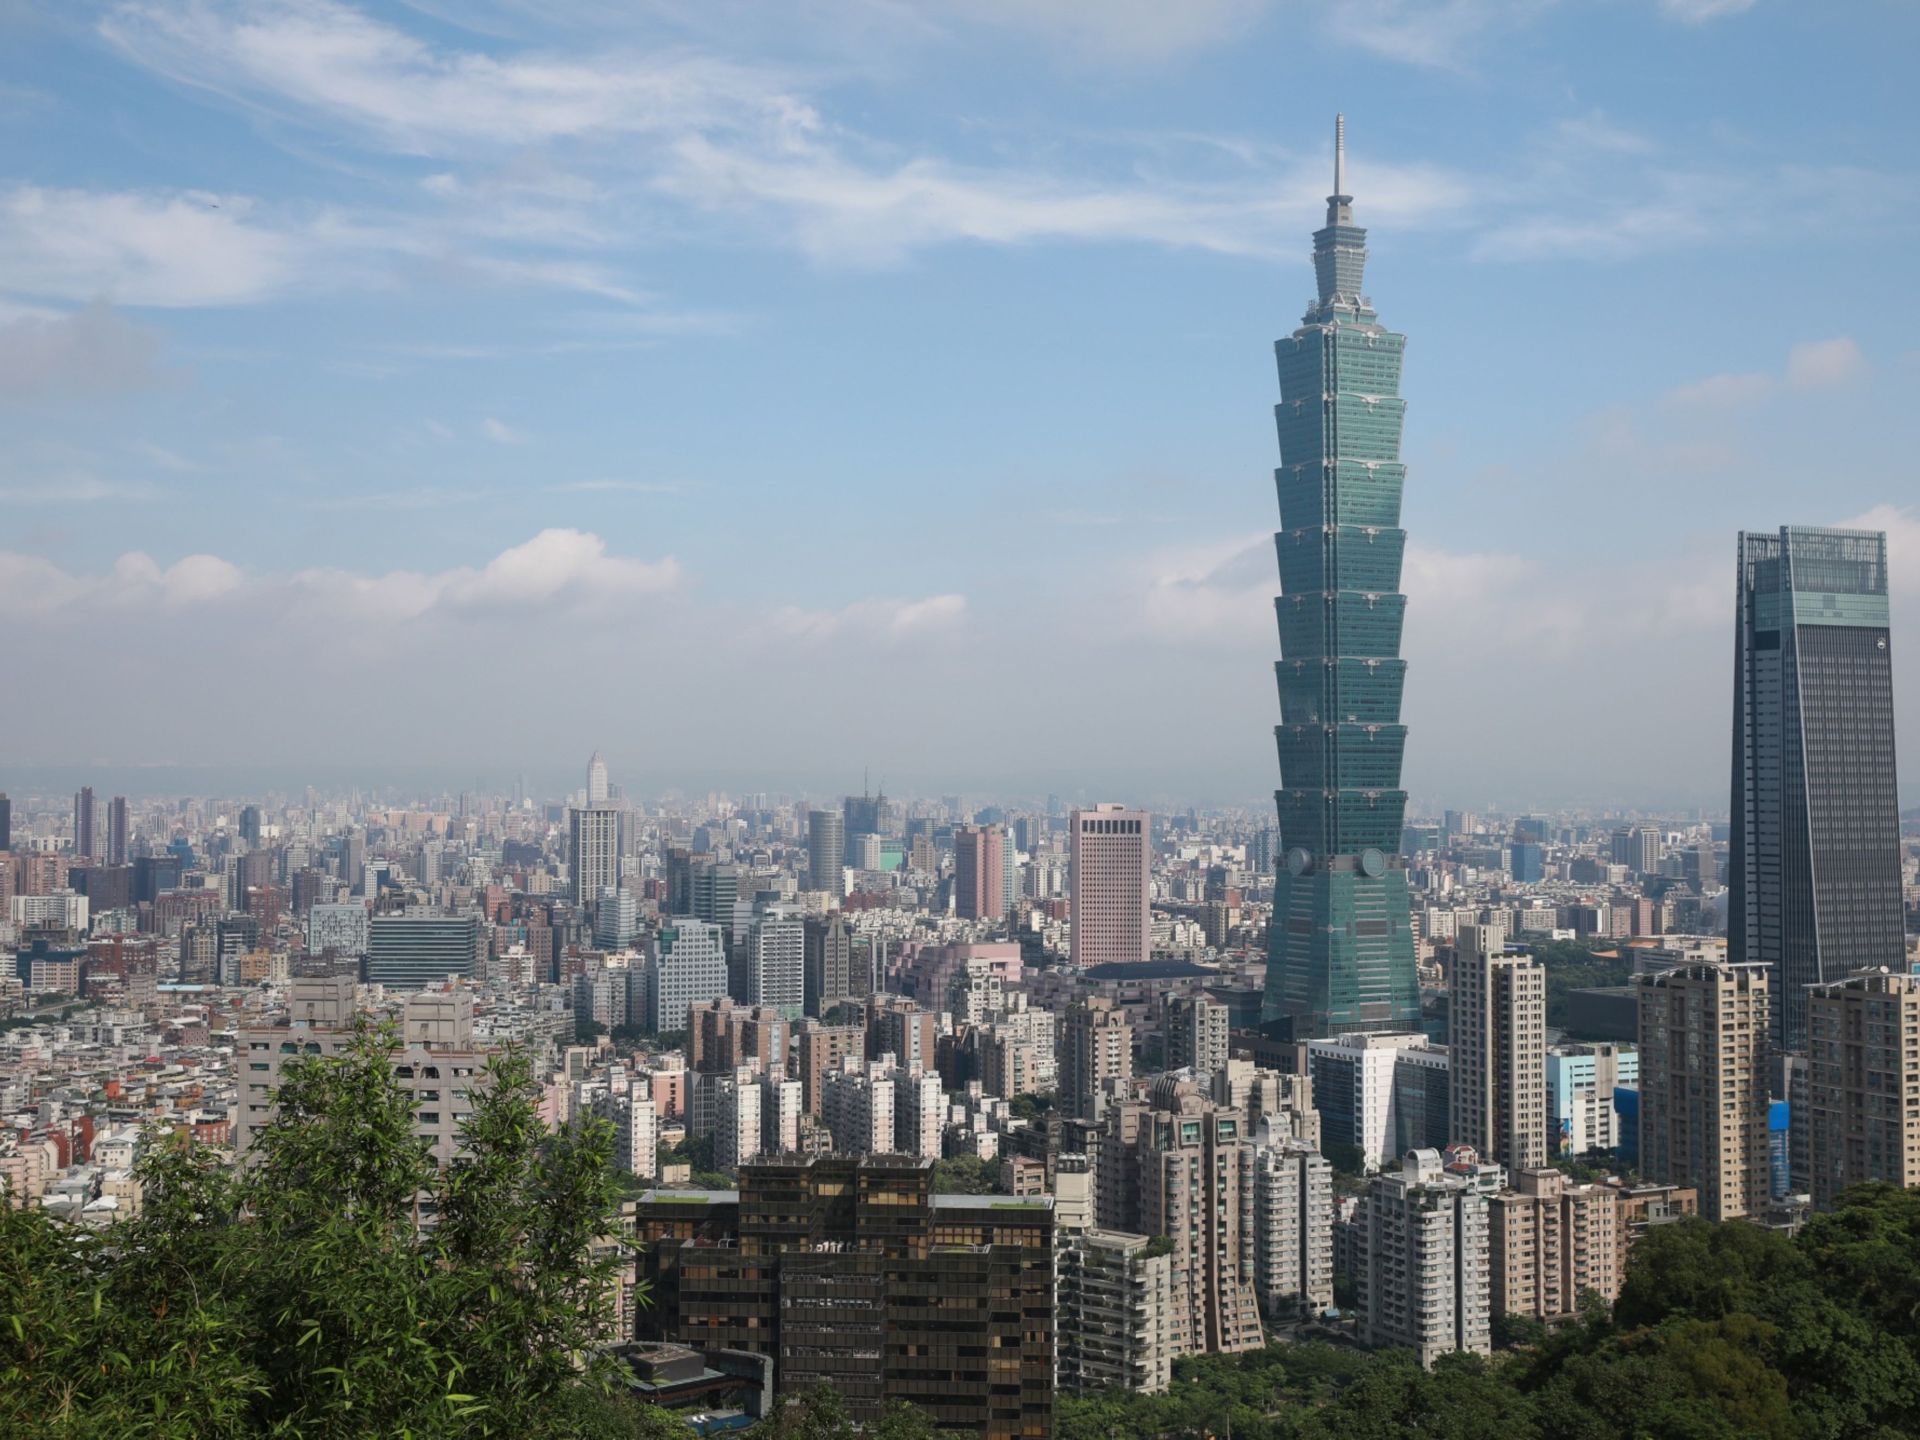 Taiwan’s foreign firms weigh future amid China risk, COVID curbs | Business and Economy